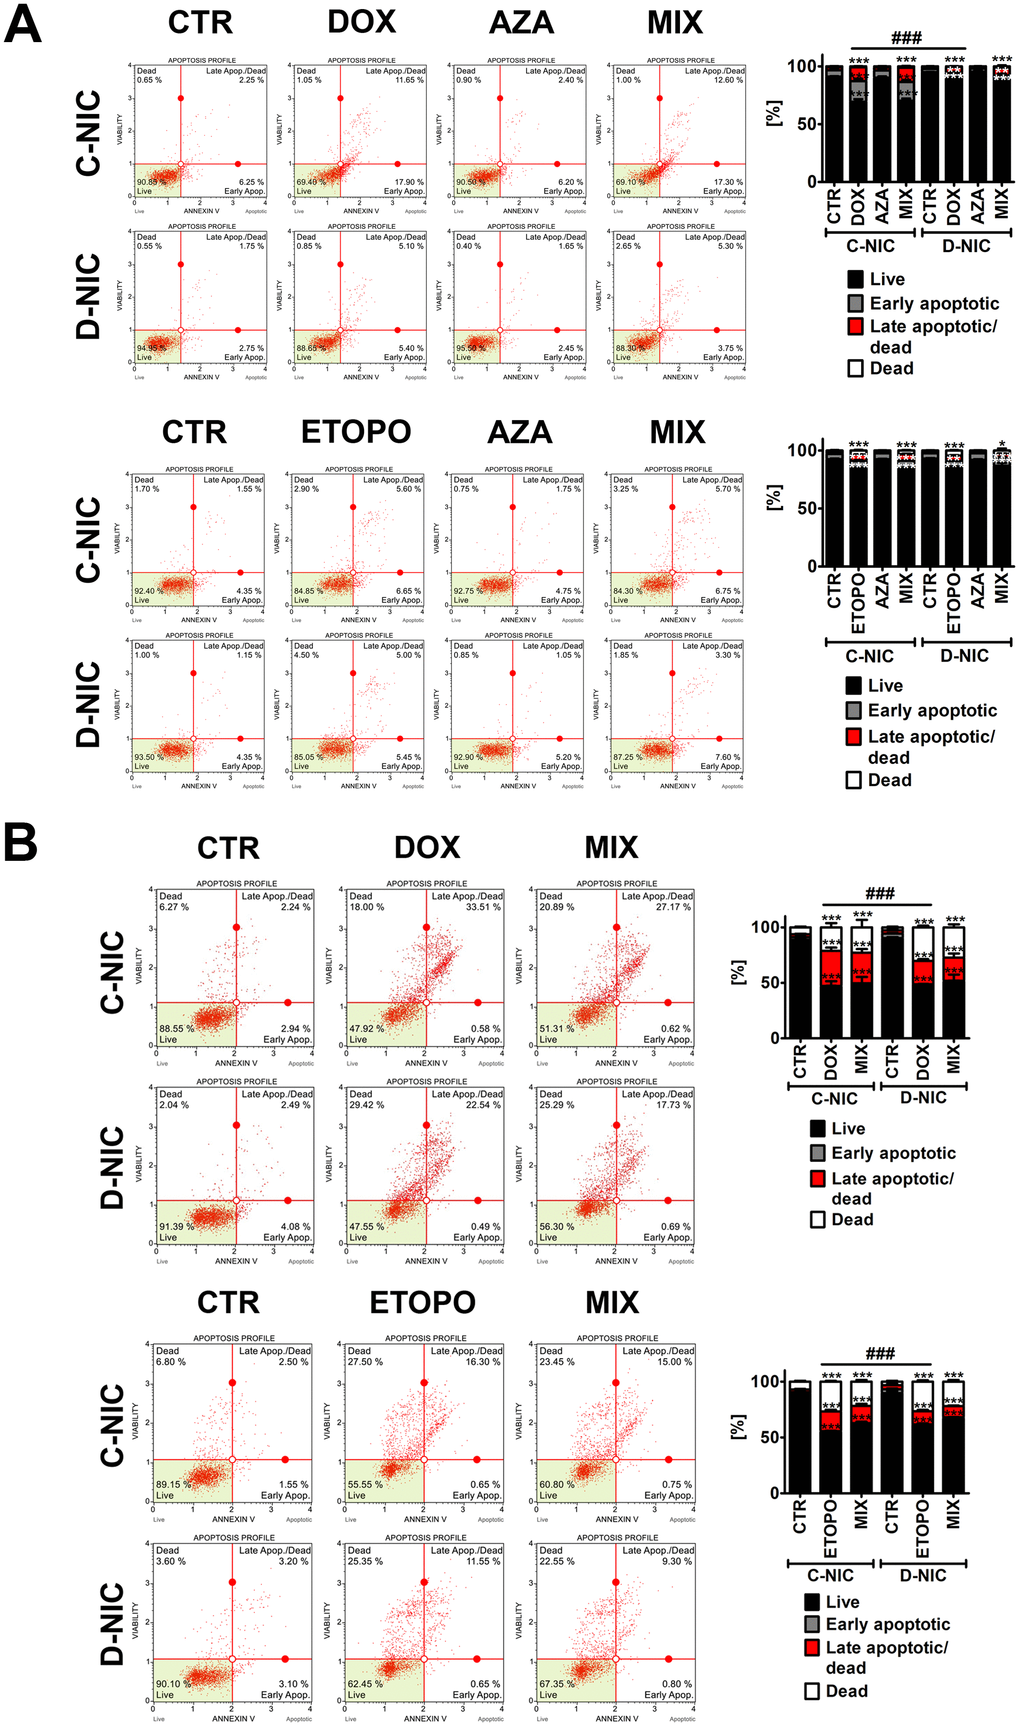 DNMT2/TRDMT1 gene knockout-mediated apoptosis and necrosis in U-251 MG glioblastoma cells treated with DOX or ETOPO for 24 h and AZA post-treatment for 24 h and immediately assayed (A) and assayed after 7 days of drug removal and AZA post-treatment for 24 h (B). Apoptosis and necrosis were analyzed using flow cytometry. Representative dot plots are shown. Bars indicate SD, n = 3, ***p **p *p a posteriori test), ###p a posteriori test). CTR, control conditions; DOX, doxorubicin treatment; ETOPO, etoposide treatment; AZA, azacytidine treatment; MIX, azacytidine post-treatment; C-NIC, control cells with unmodified levels of DNMT2/TRDMT1 containing control plasmid; D-NIC, cells with DNMT2/TRDMT1 gene knockout containing dedicated DNMT2 double nickase plasmid.